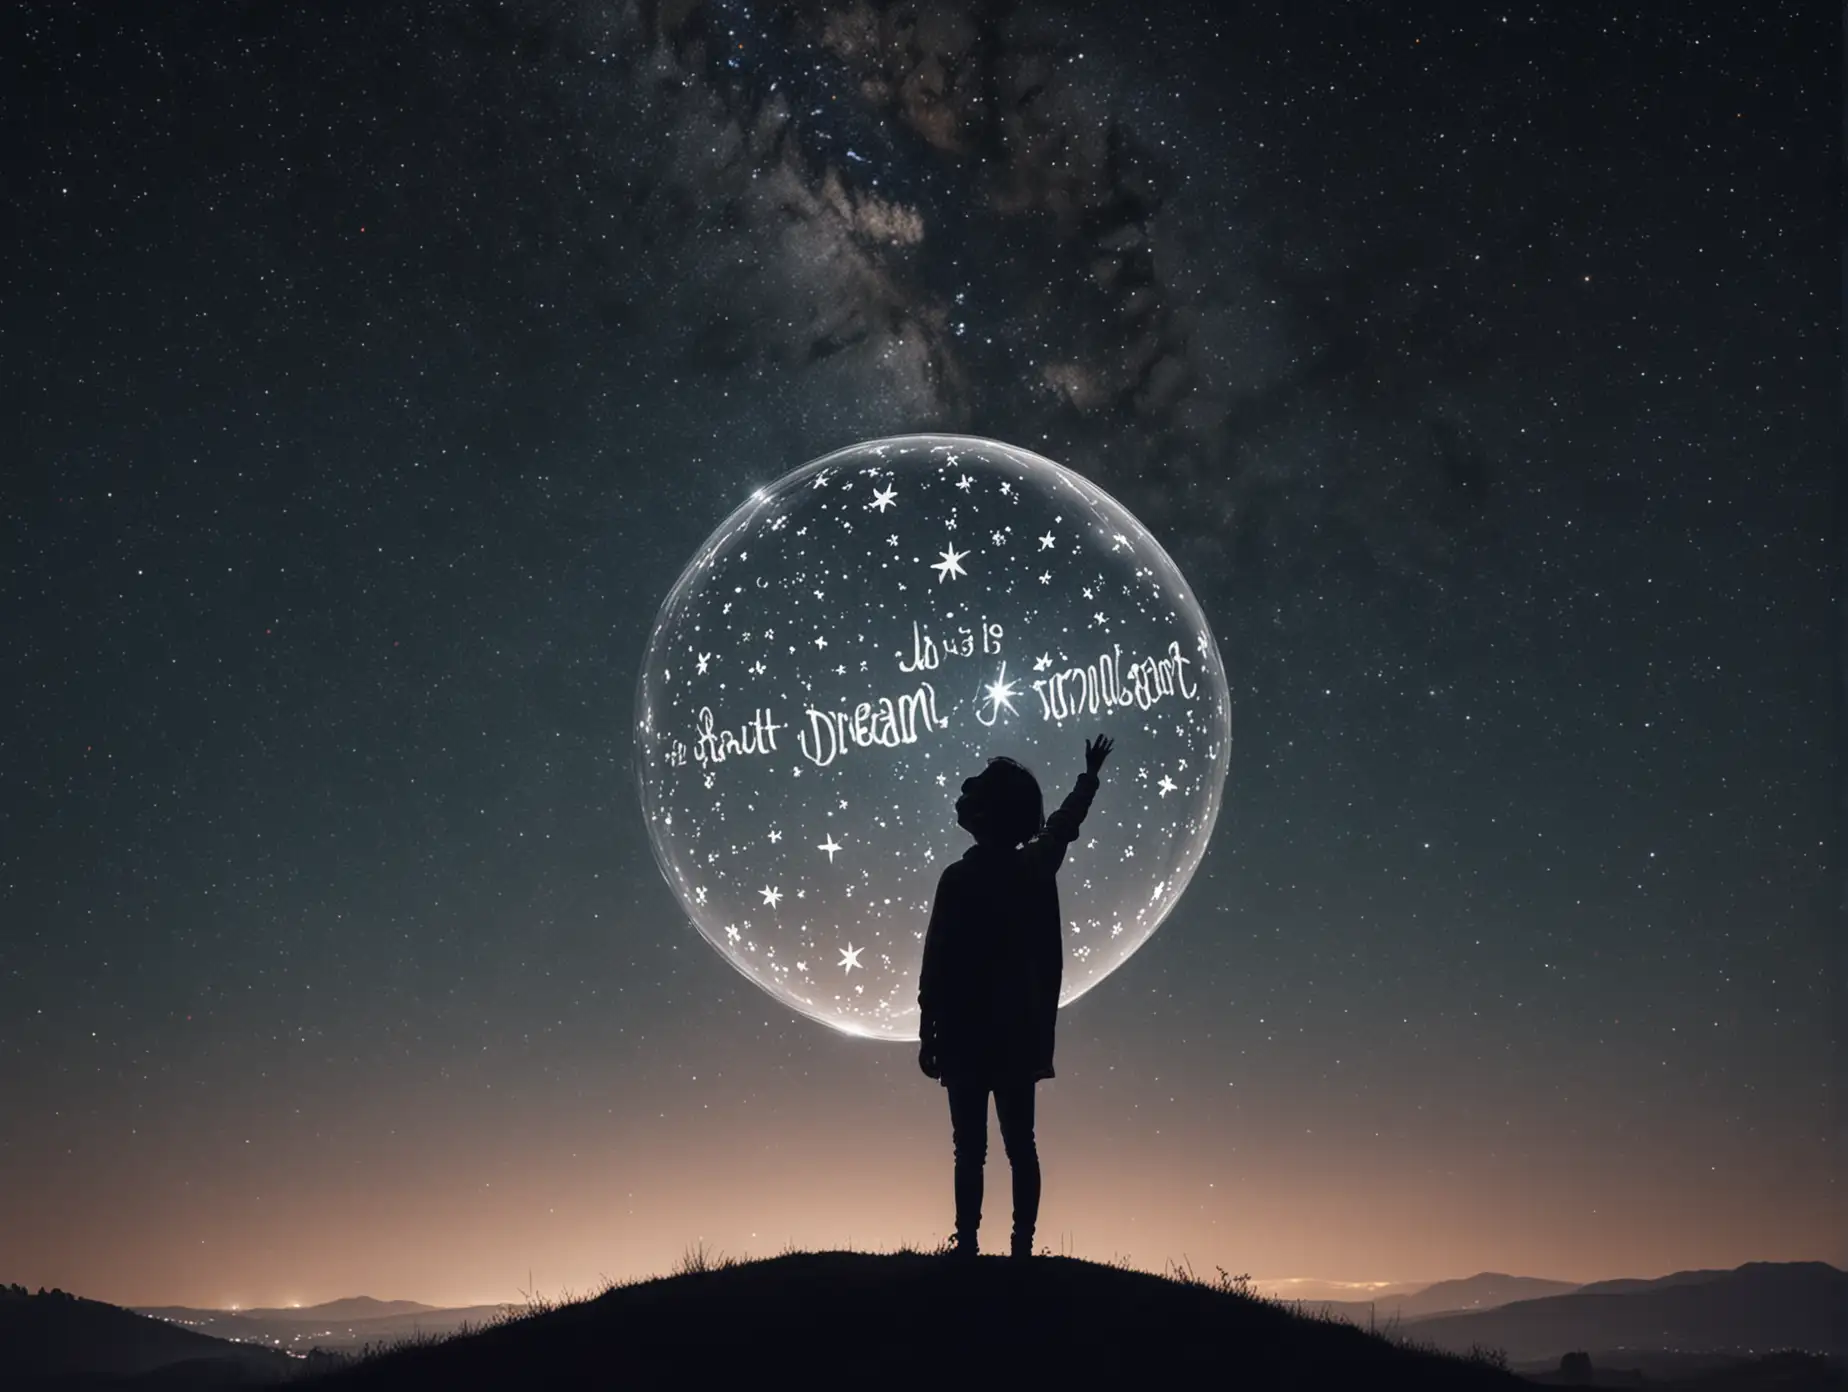 A silhouette of a person standing on a hilltop, looking up at the starry sky. The person's head is replaced by a big dream bubble with the words 'What is your dream?' inside.